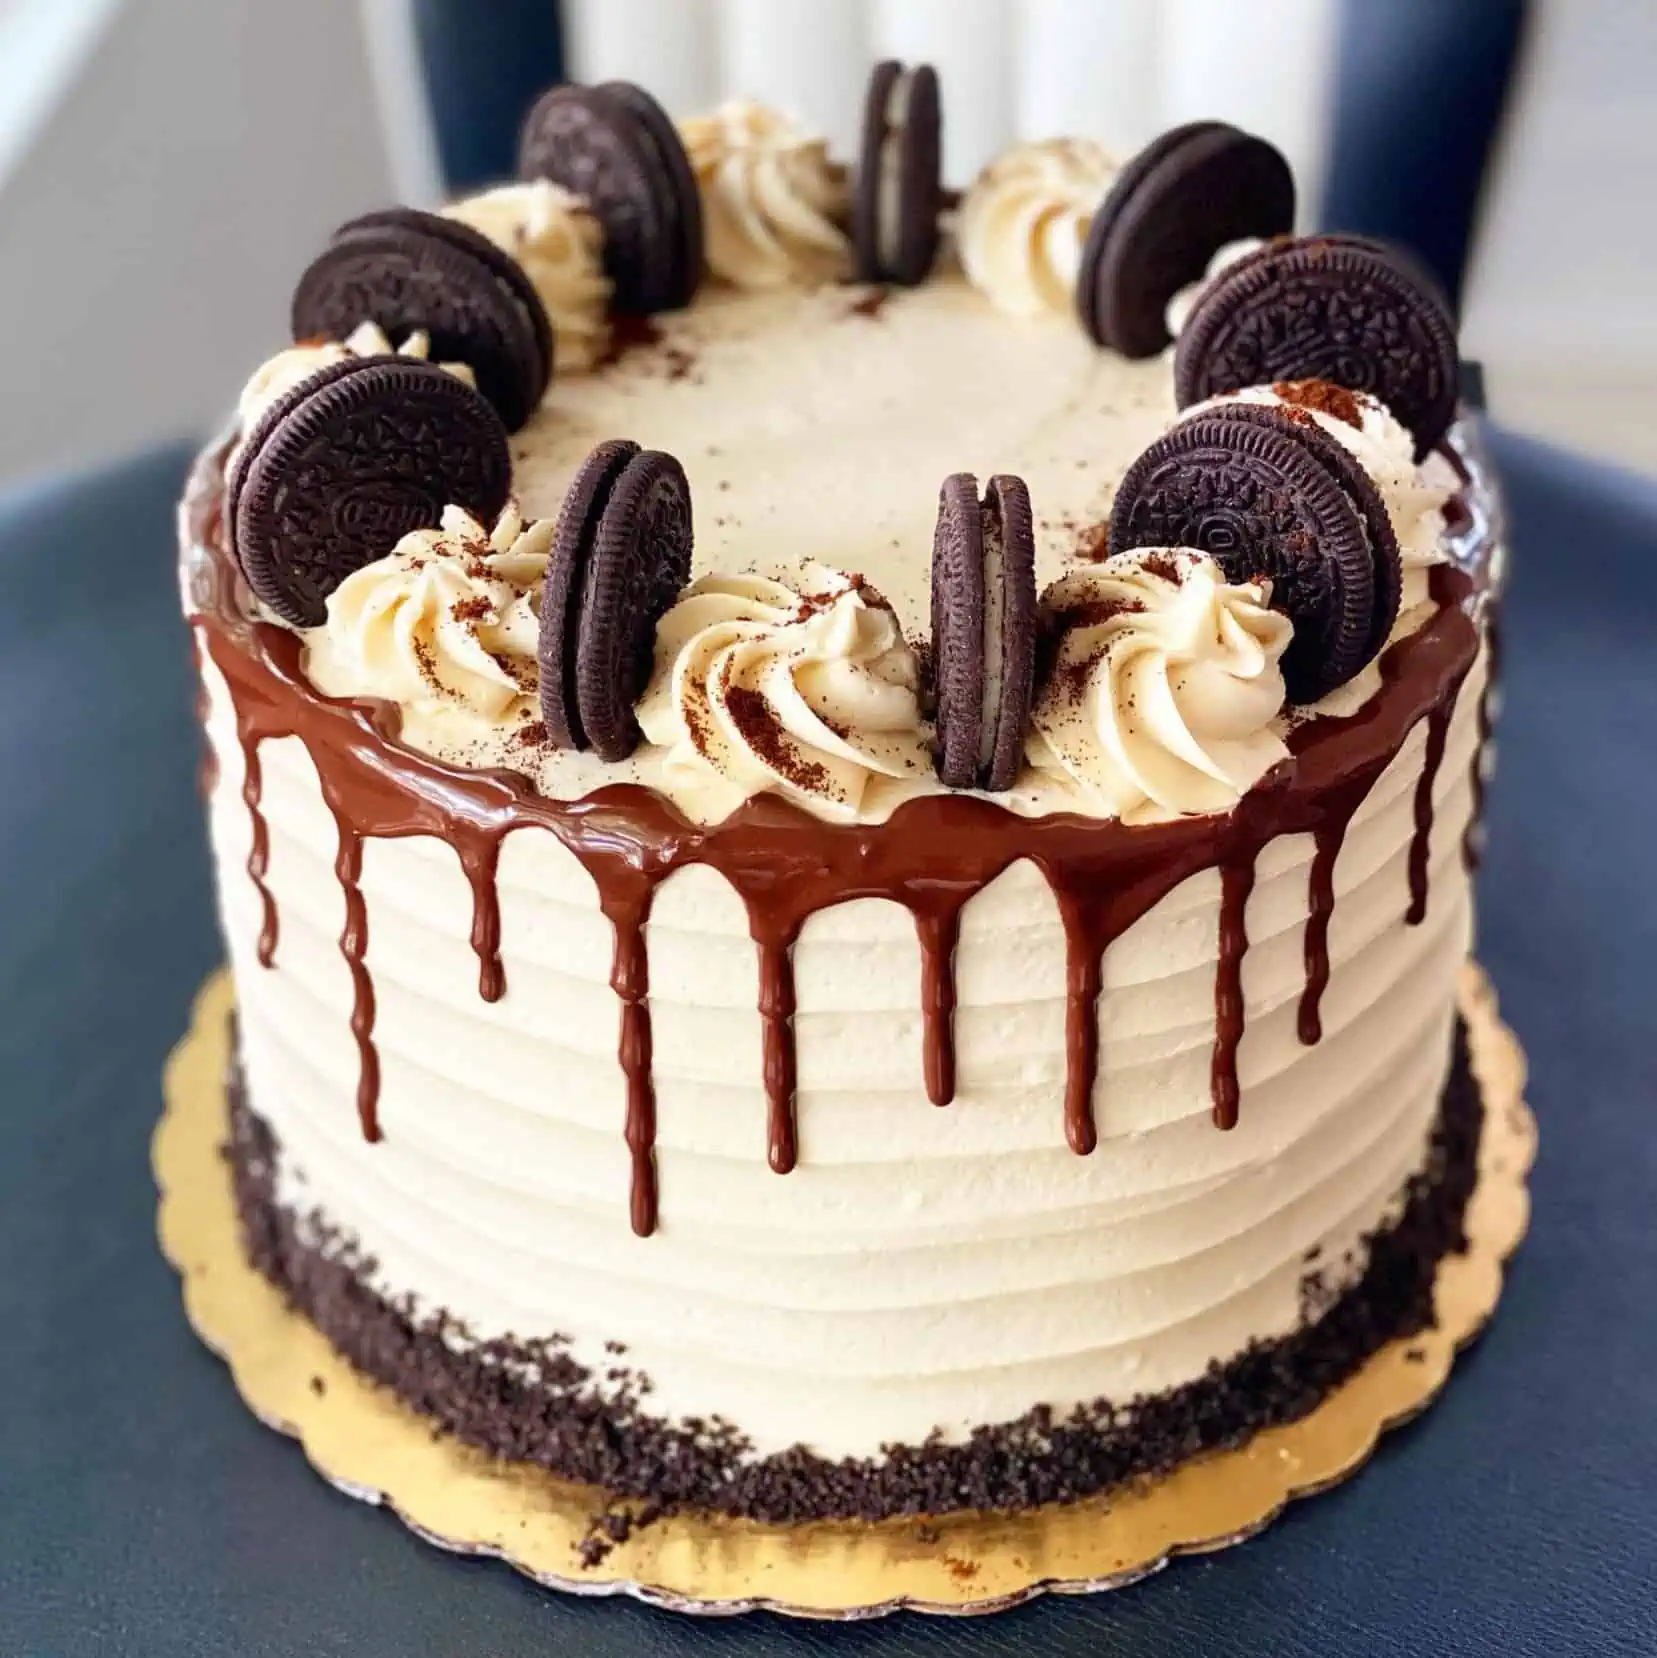 A vegan Mississippi mud cake from Capital City Bakery.